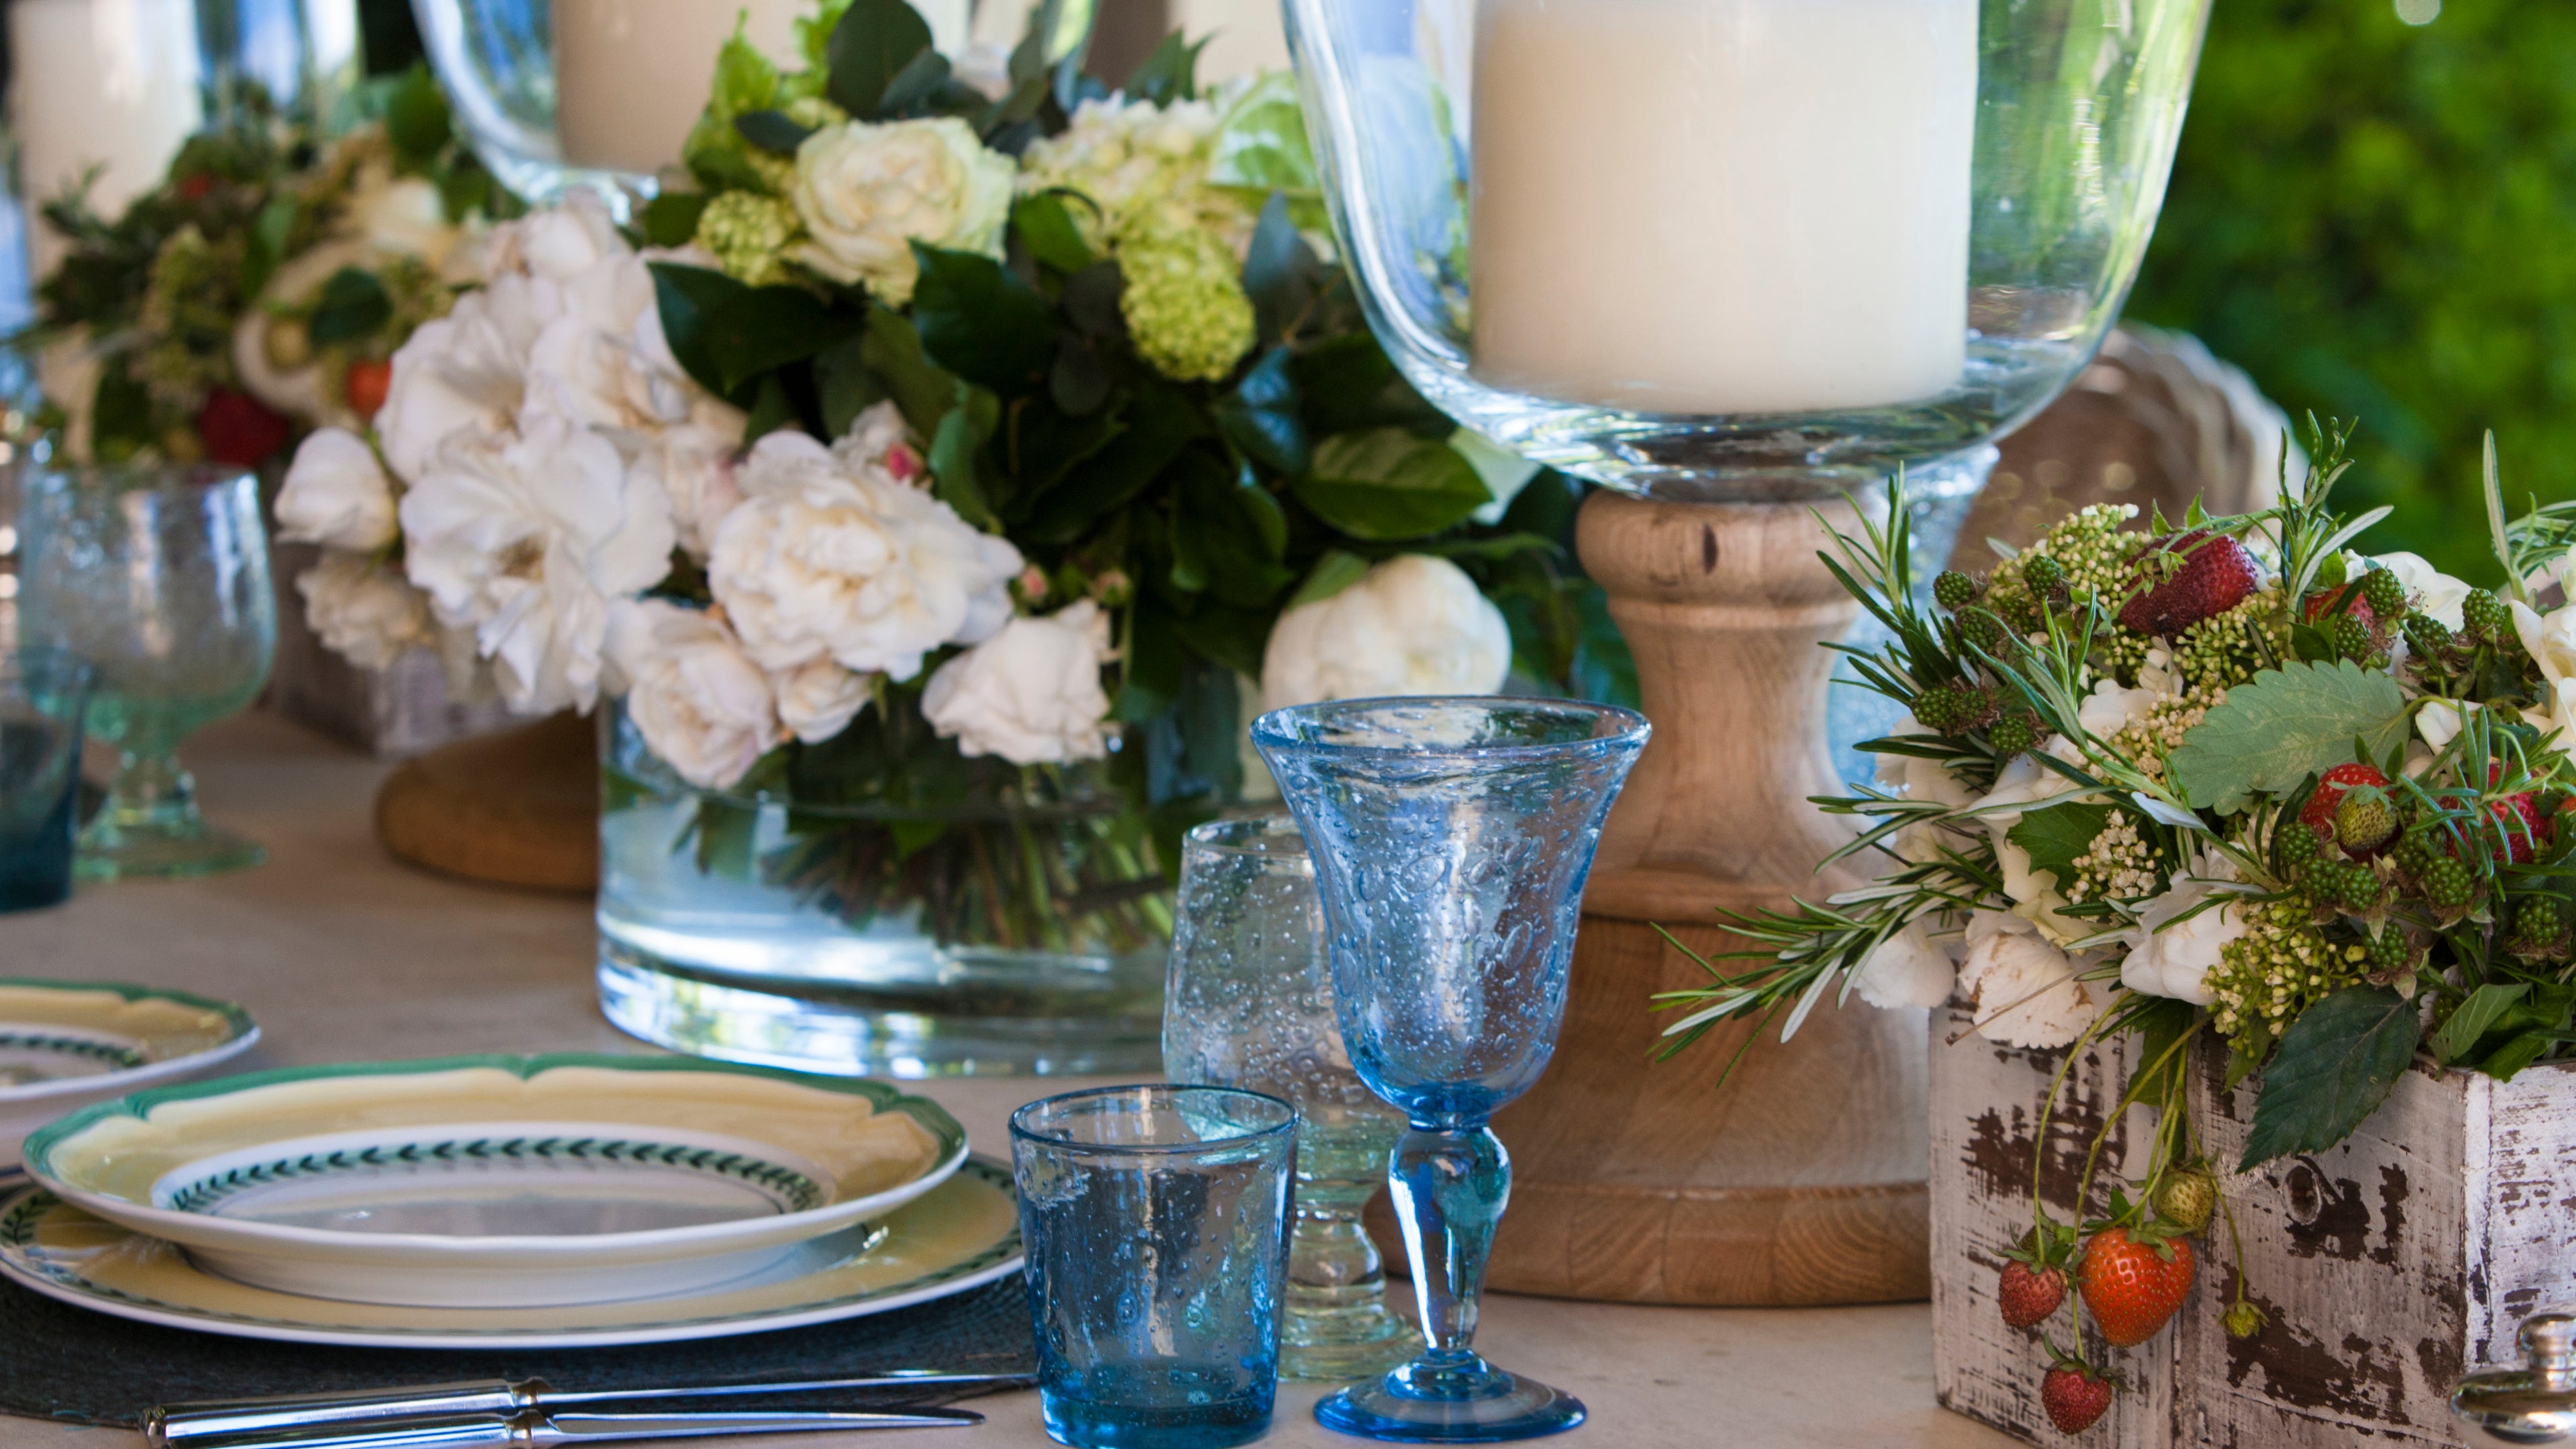 Table laid with blue wine glass and blue tumbler